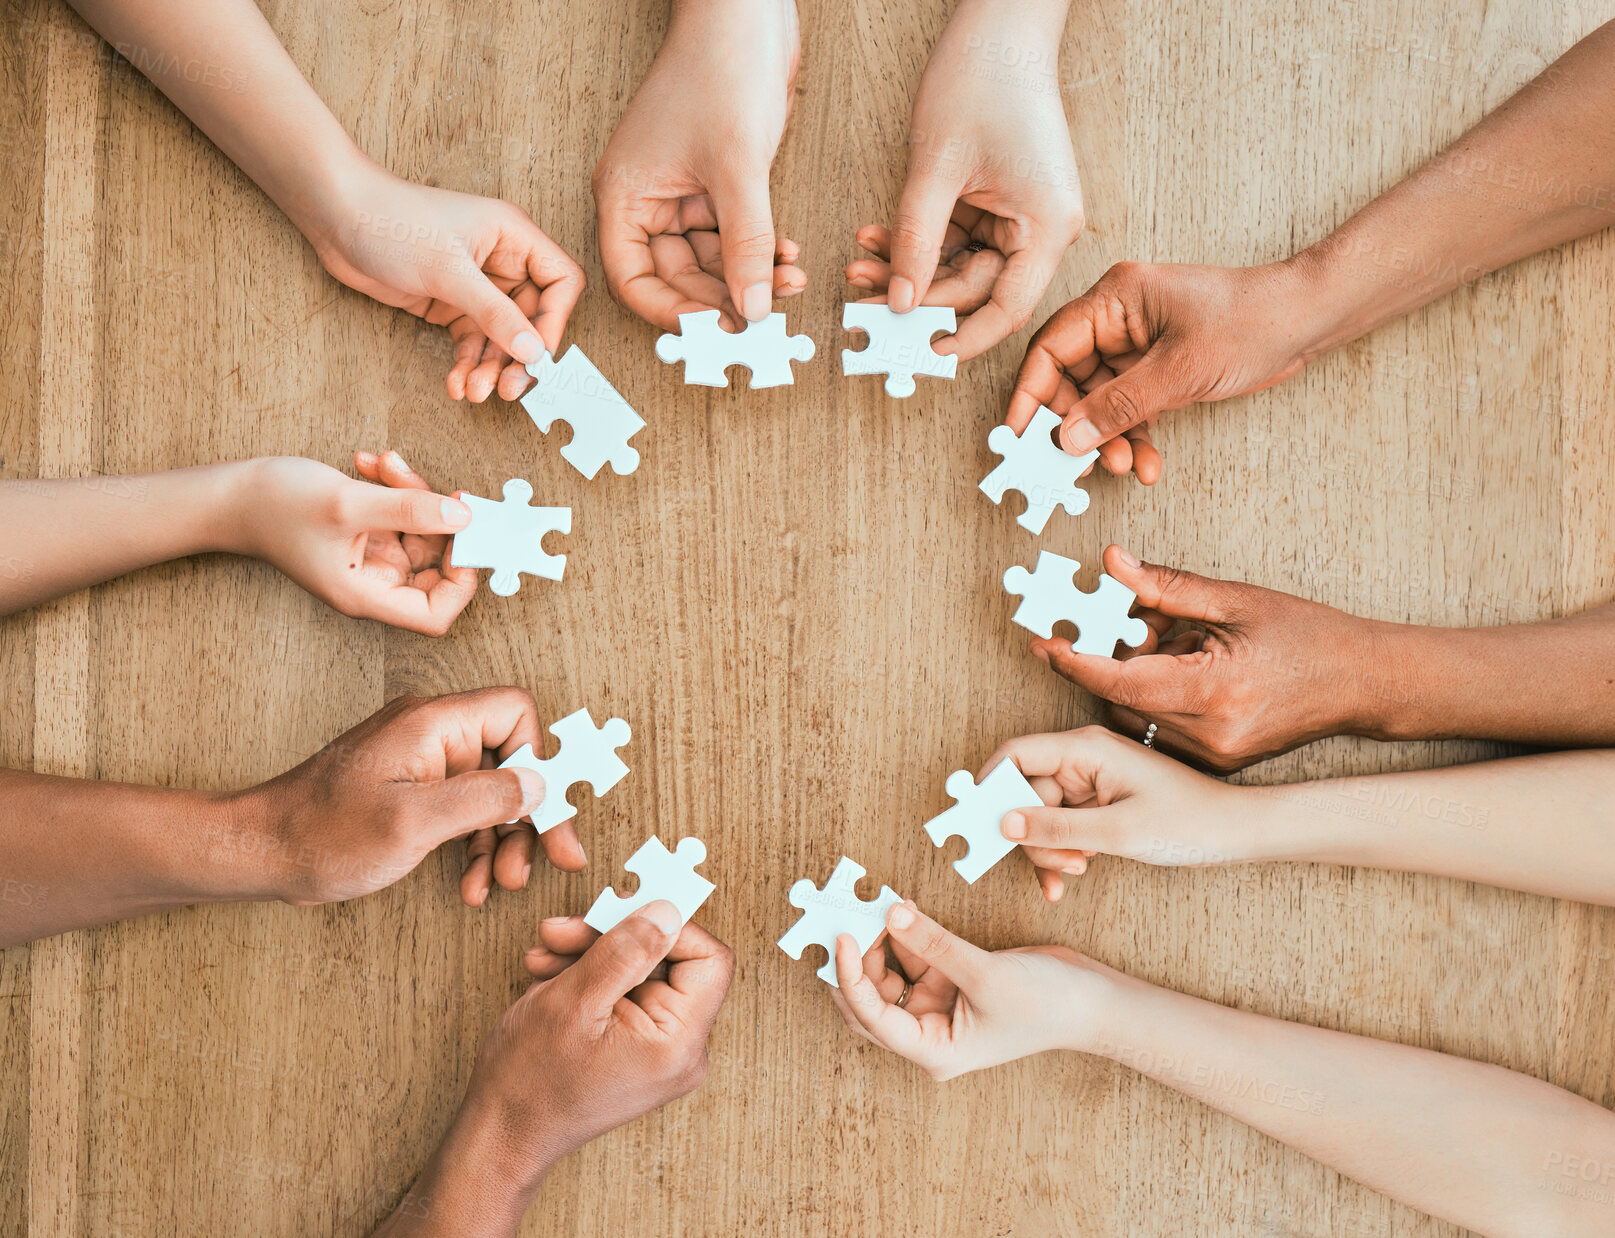 Buy stock photo Shot of a family building a puzzle together at home